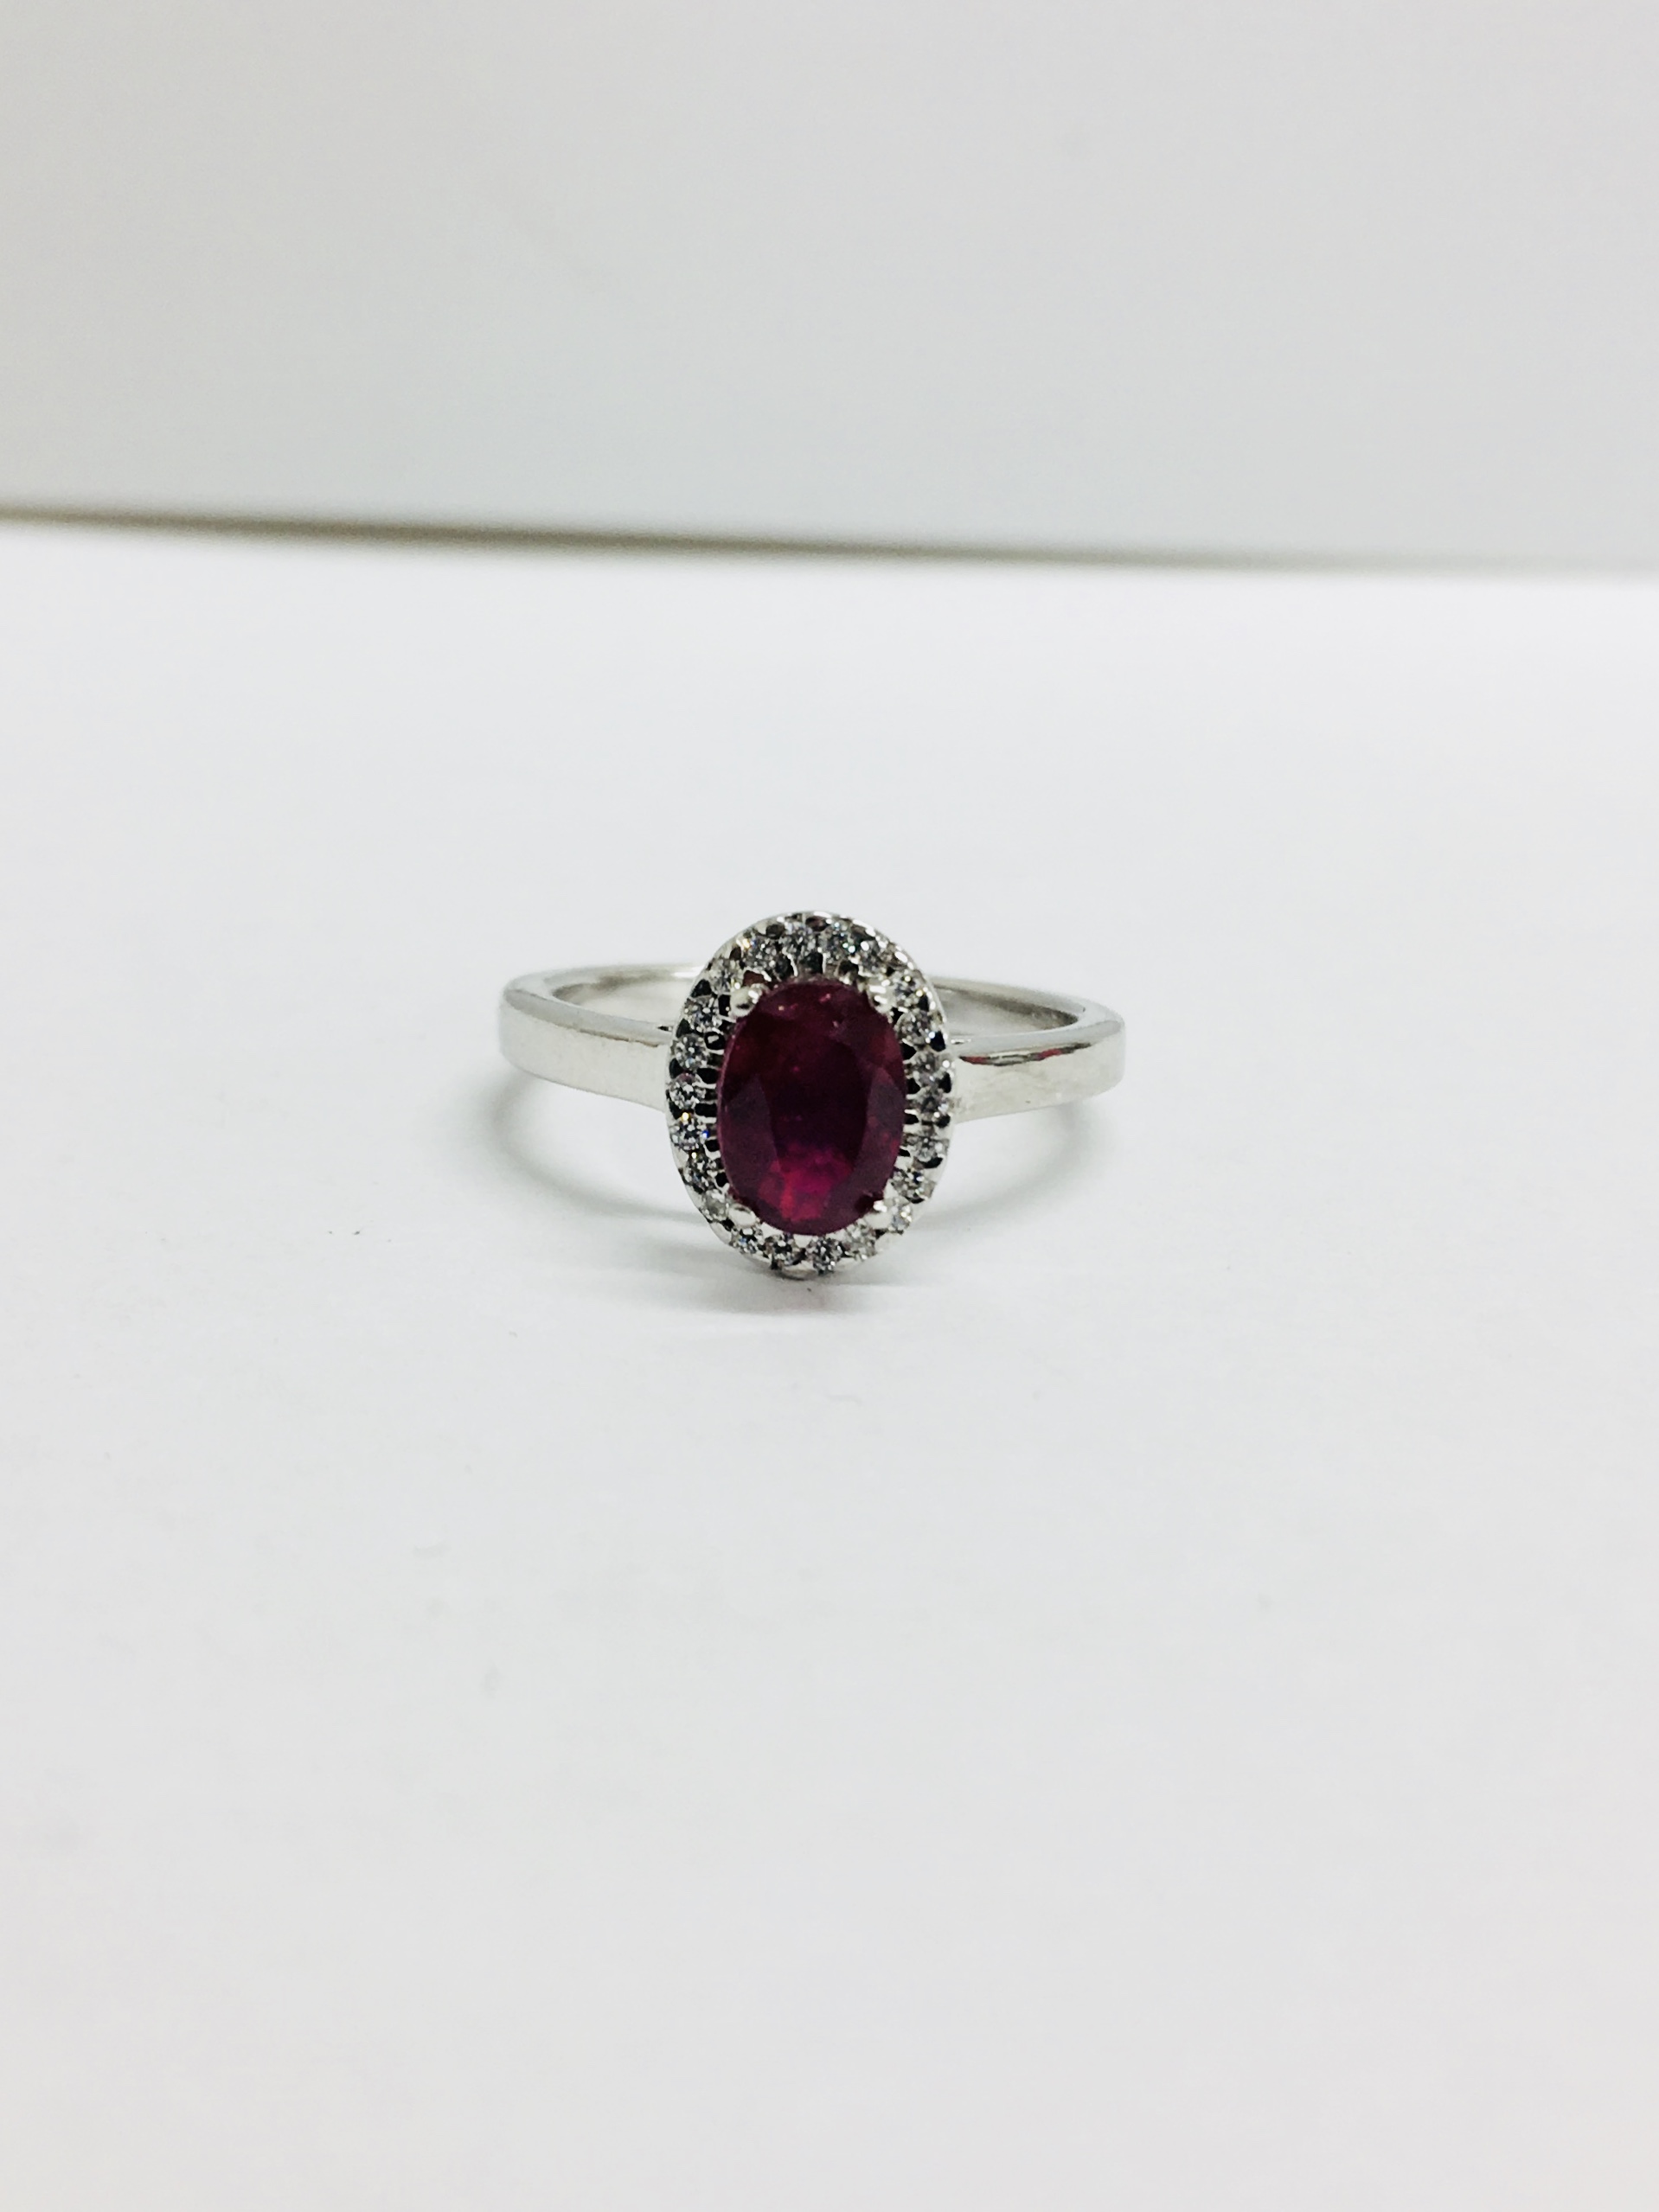 Ruby And Diamond Cluster Ring Set In Platinum. - Image 2 of 4